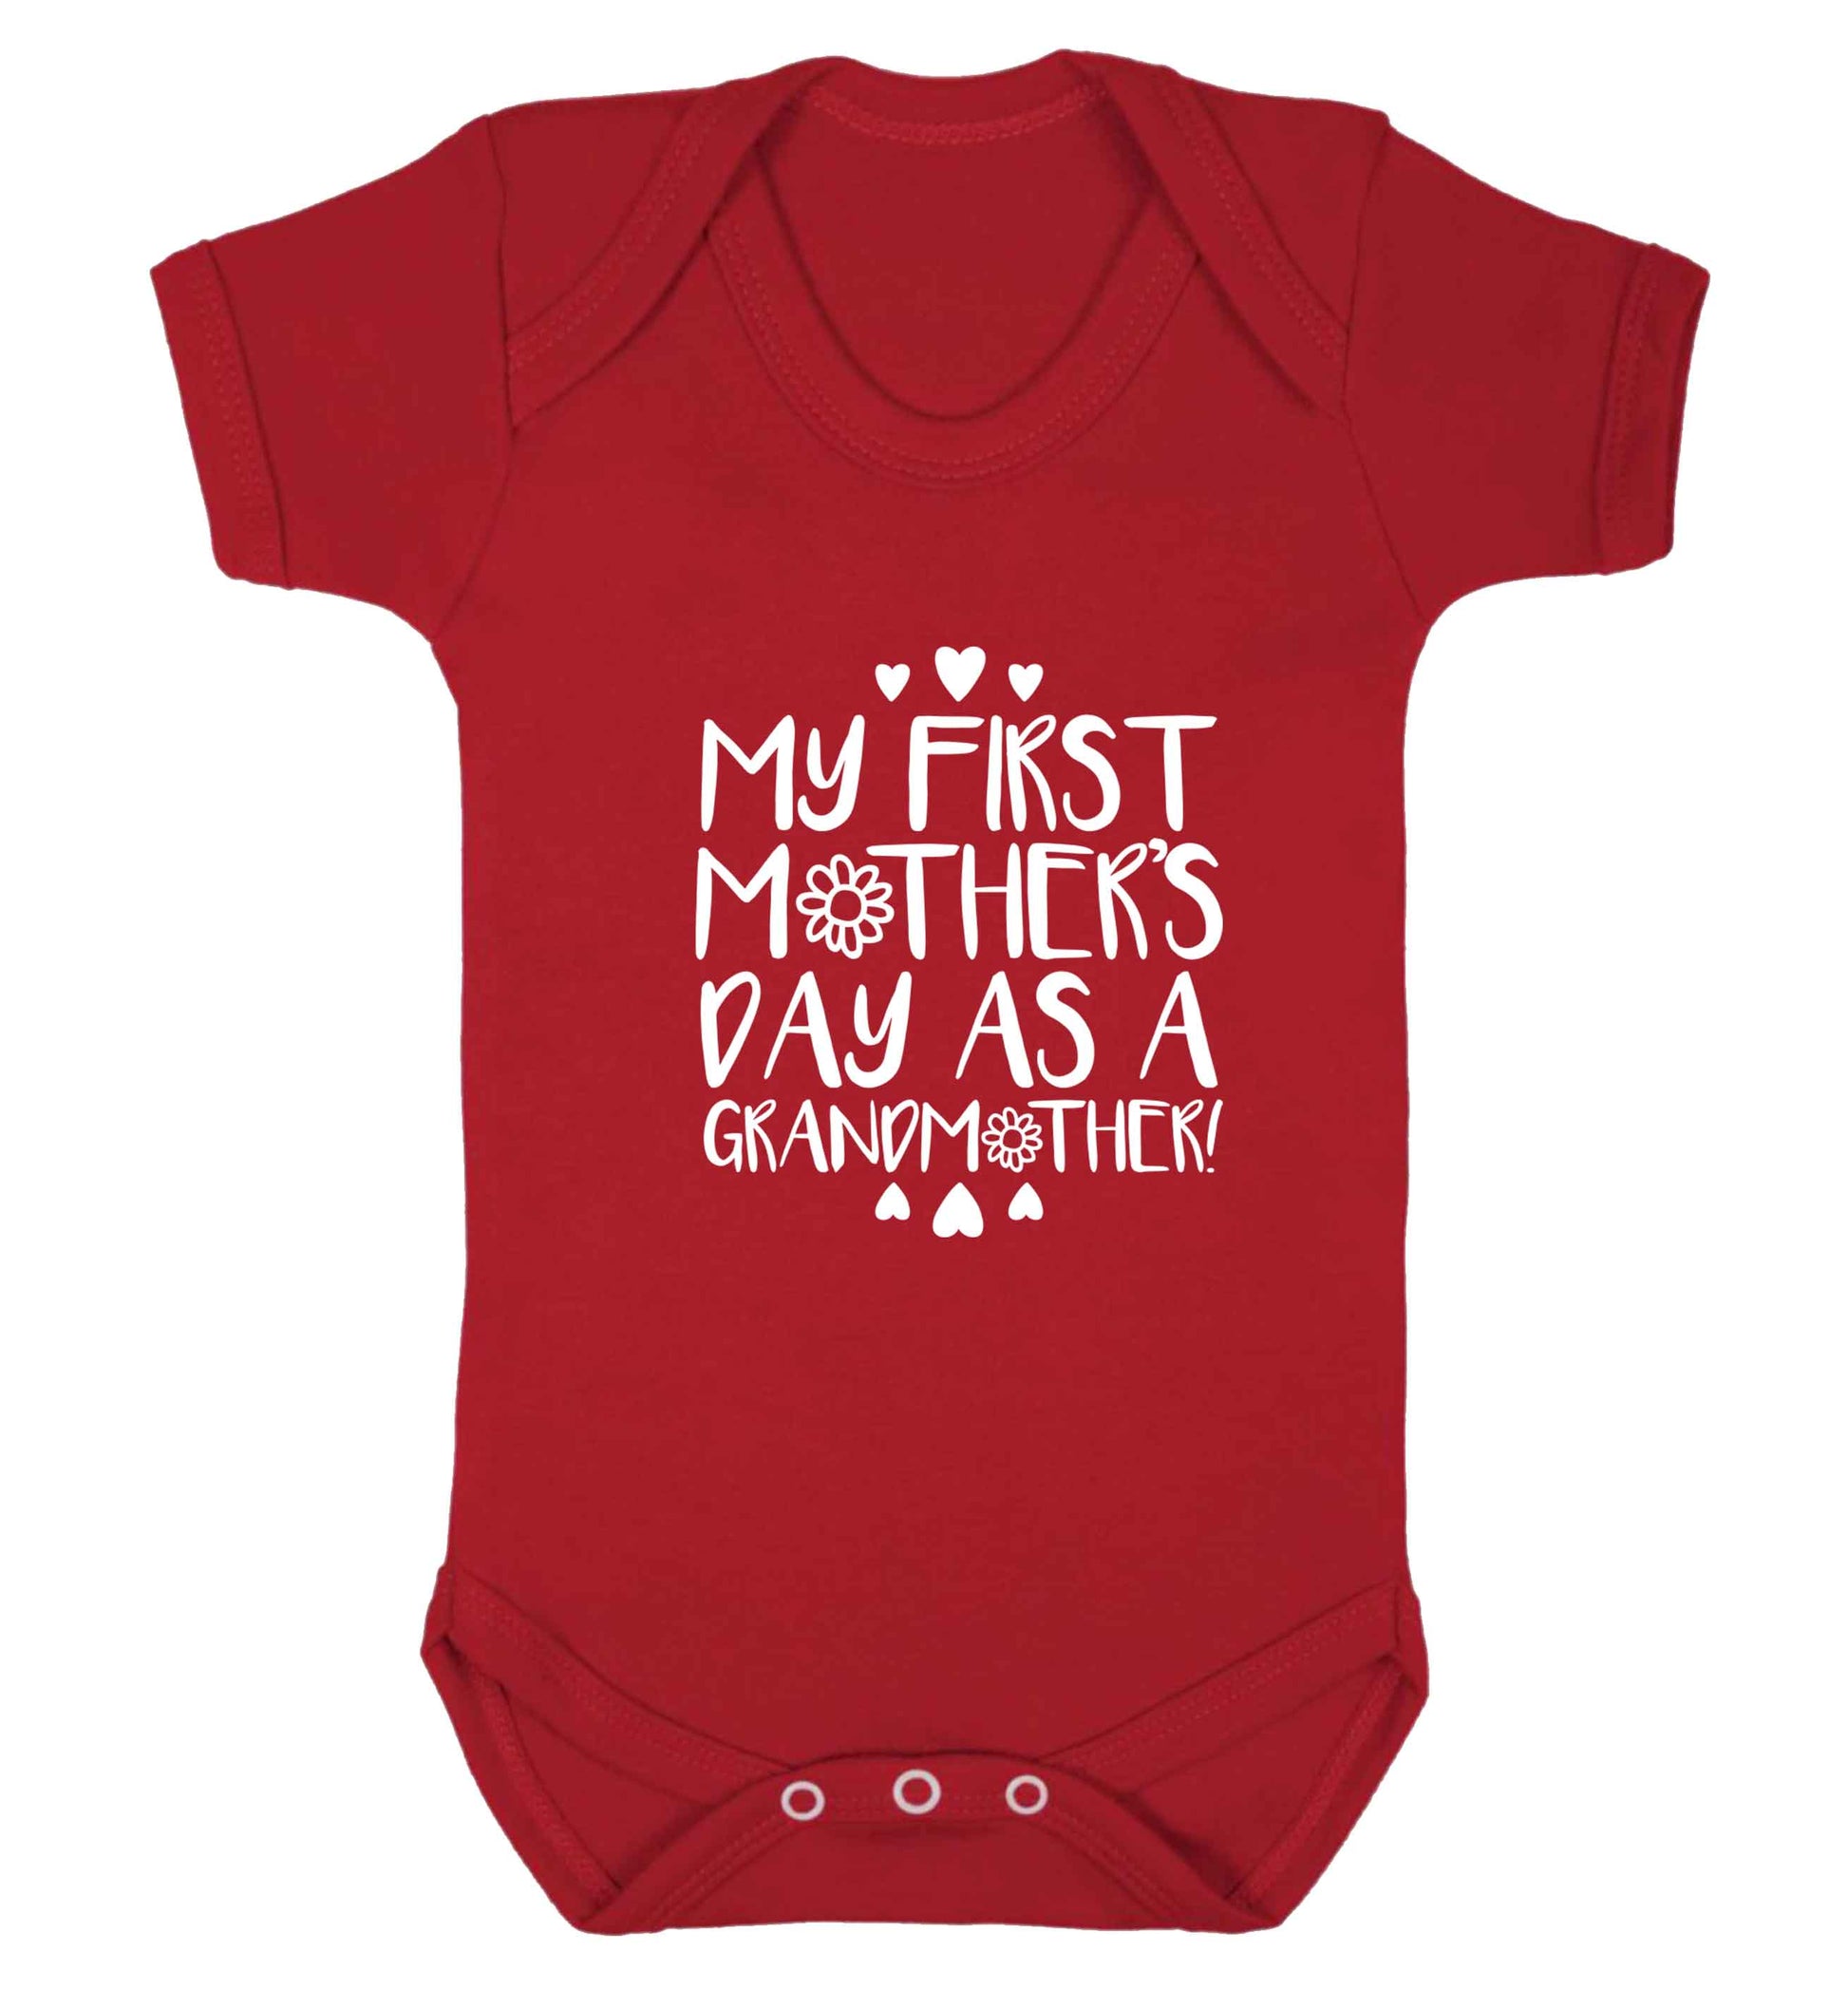 It's my first mother's day as a grandmother baby vest red 18-24 months